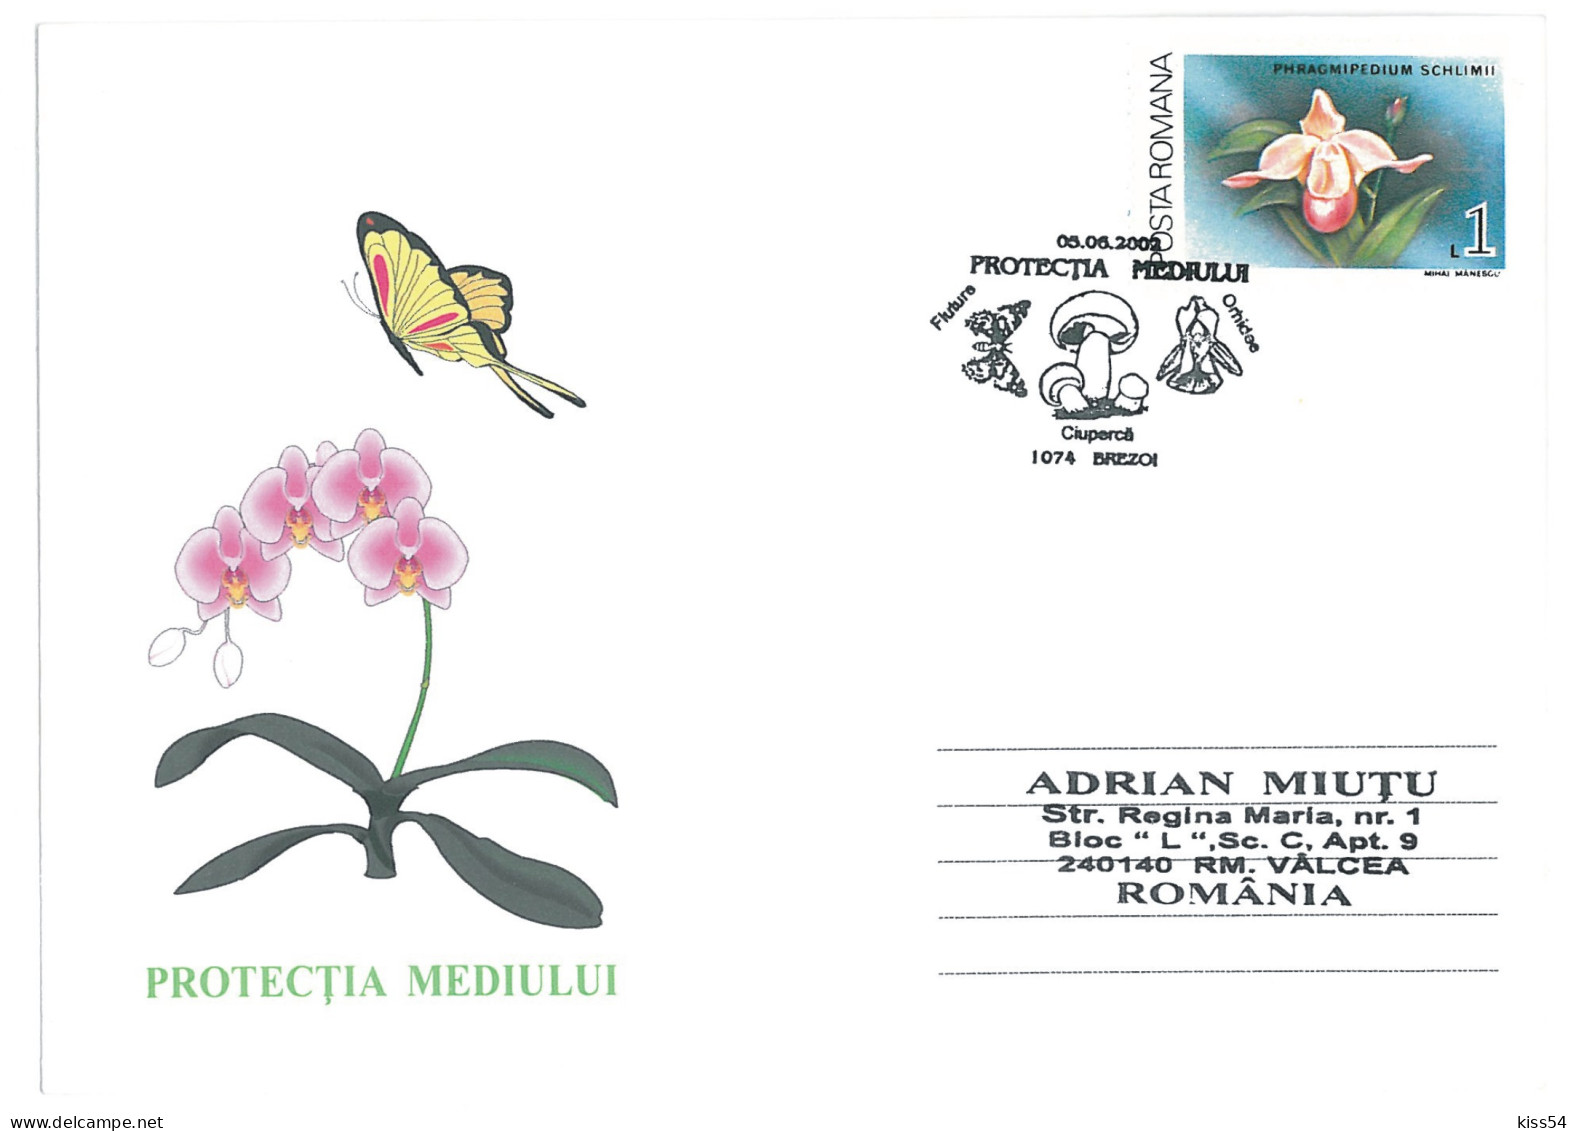 COV 22 - 1718, ORCHIDS, Environmental Protection, Romania - Cover - Used - 2002 - Cartes-maximum (CM)